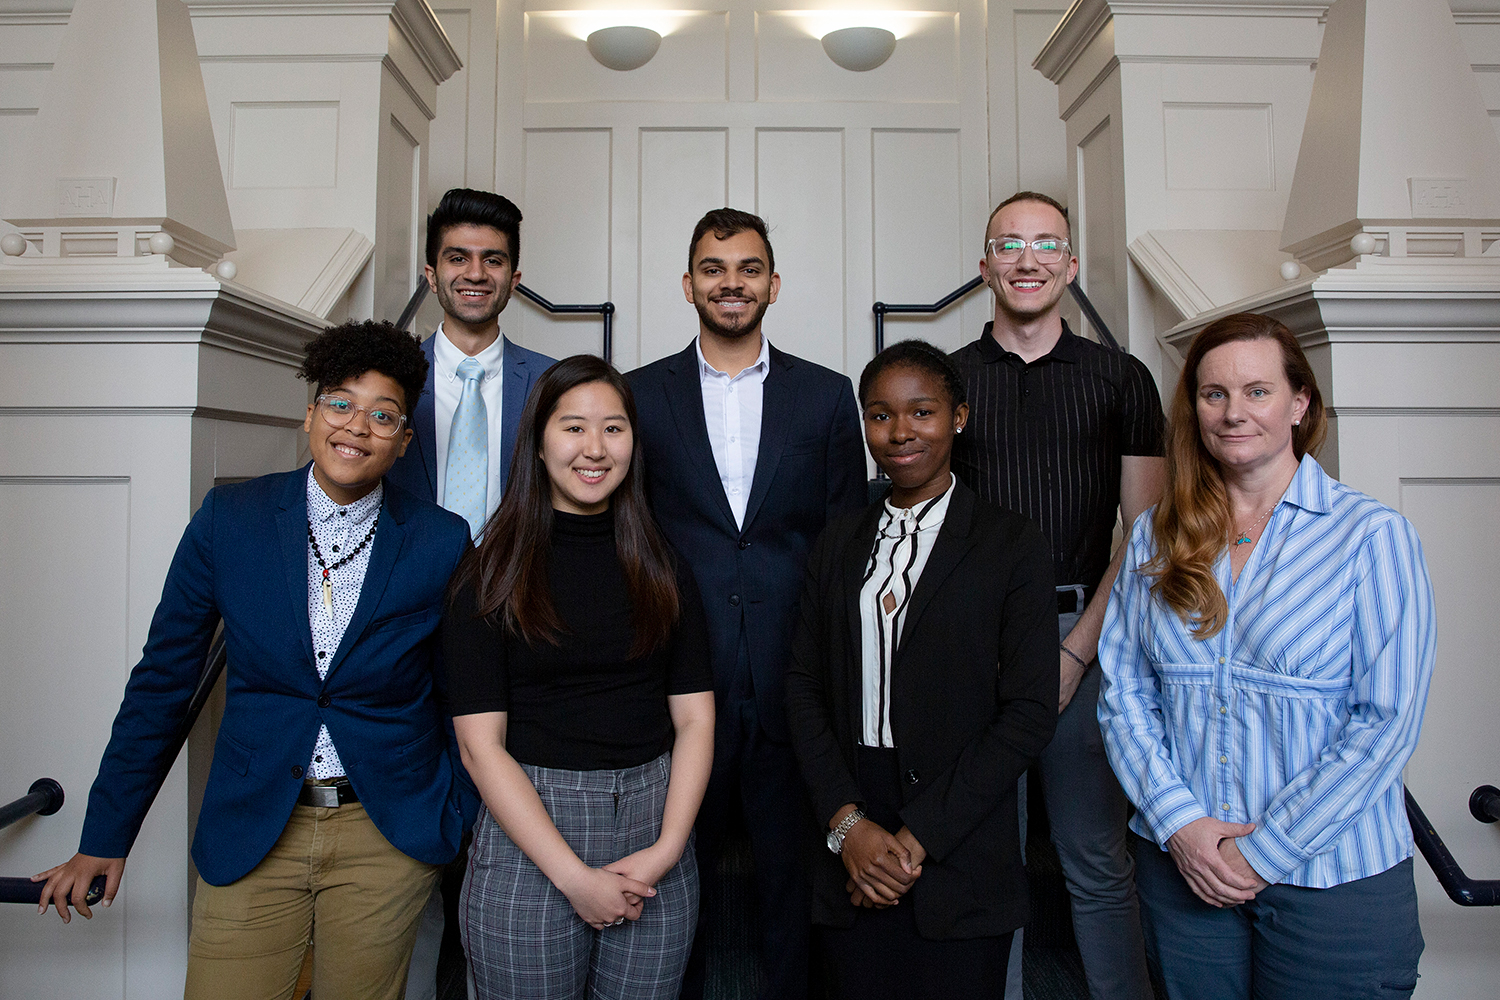 The 2019 Fulbright U.S. Student Program honorees. First row, from left to right: Chriss Sneed, Ph.D. student in sociology; Angela Kang ’19 (CLAS); Brianna McClure ’19 (CLAS); Kim Sawicki ’19 (CAHNR). Second row, from left to right: Sahil Laul ’19 (CLAS); Dhruv Shah ’19 (CLAS); Omar Taweh ’19 (CLAS). (Bri Diaz/UConn Photo)